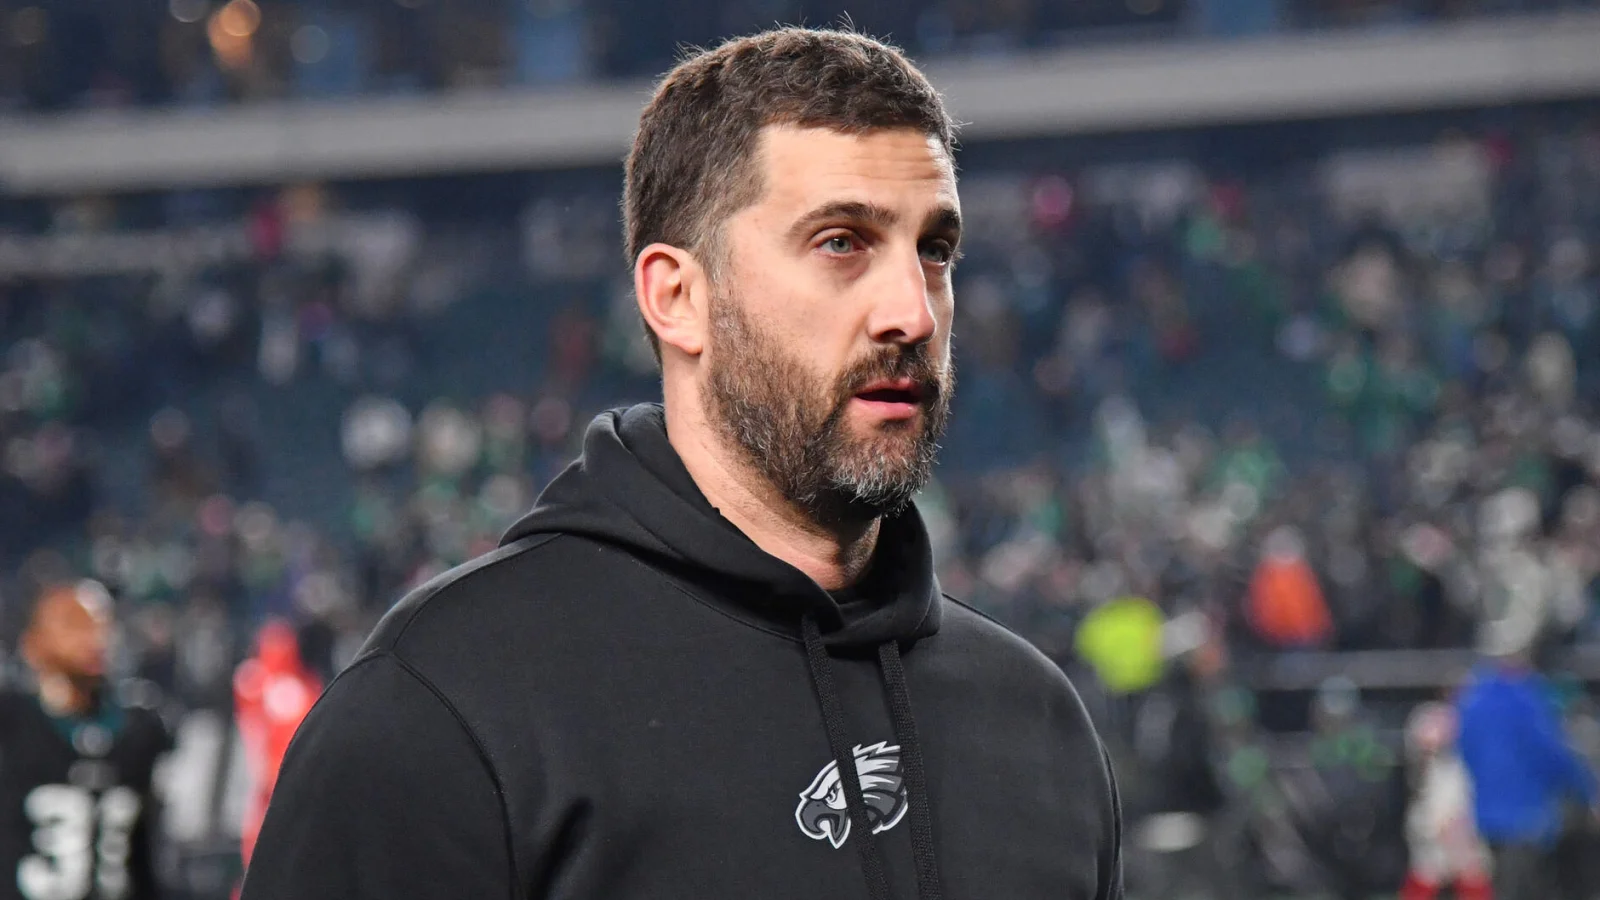 Eagles are apparently planning to make significant coaching staff